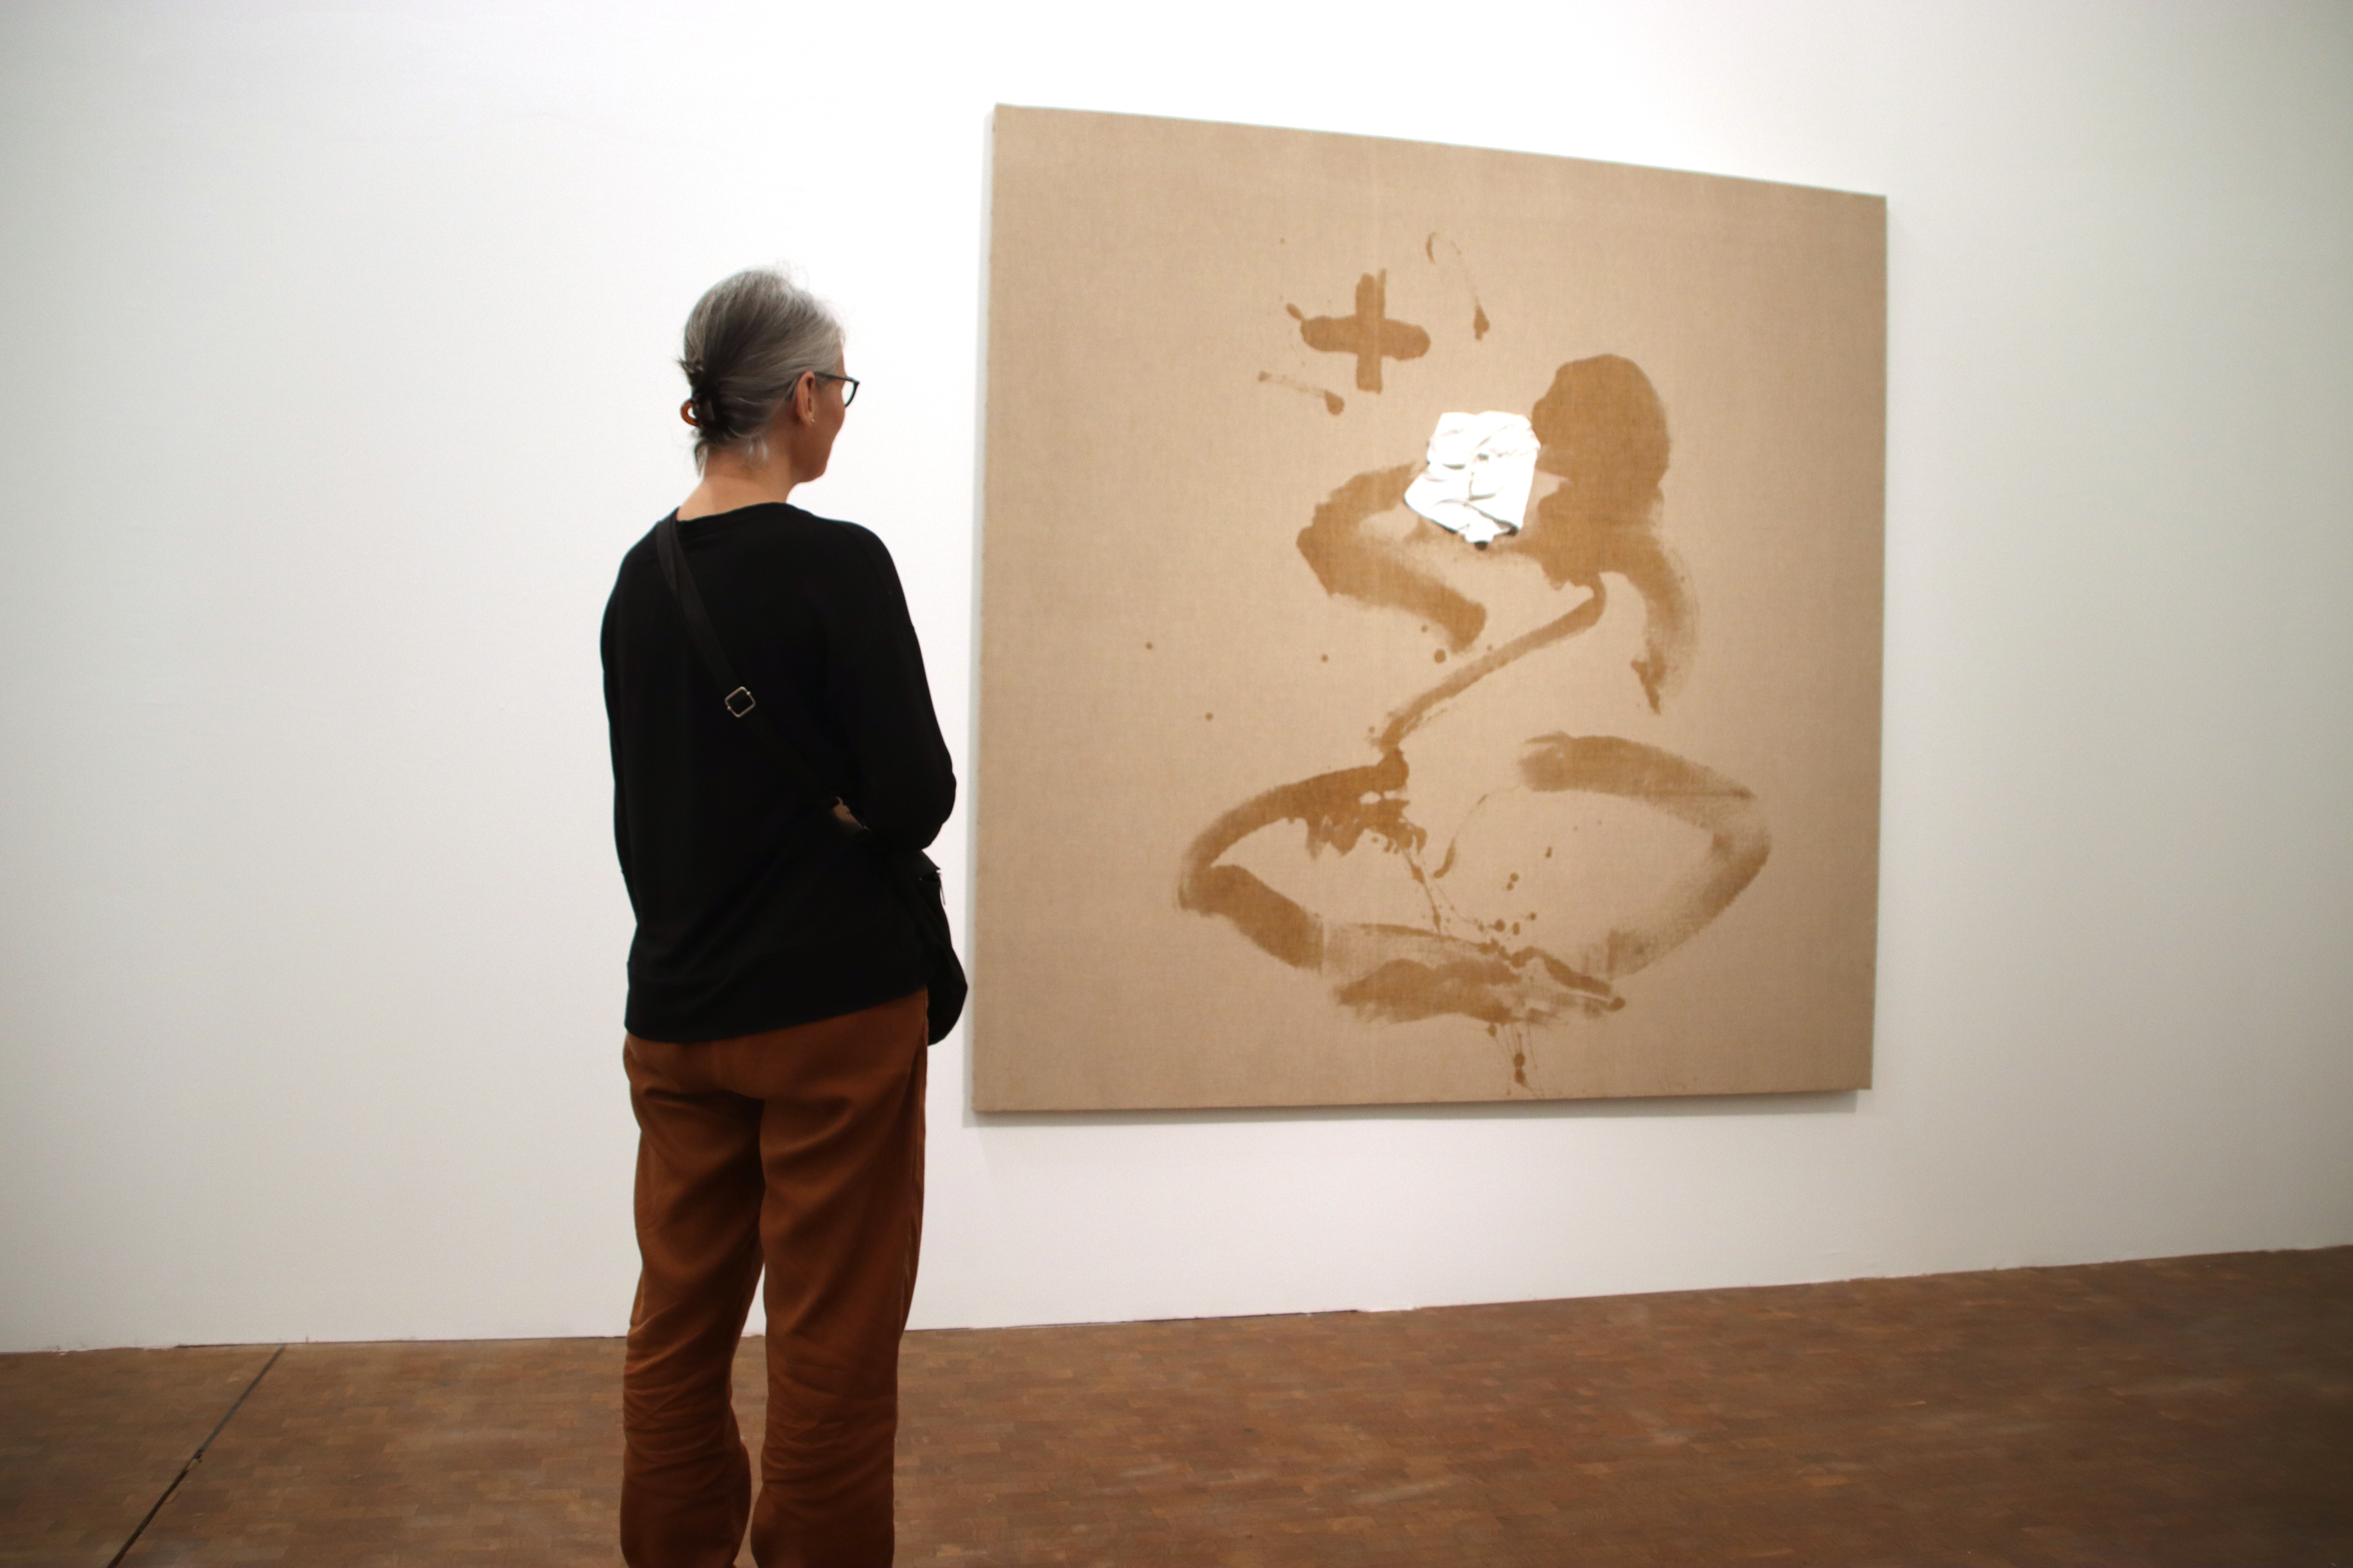 One of the works in the 'Tàpies: The Zen Imprint' exhibition at the Antoni Tàpies Foundation in Barcelona